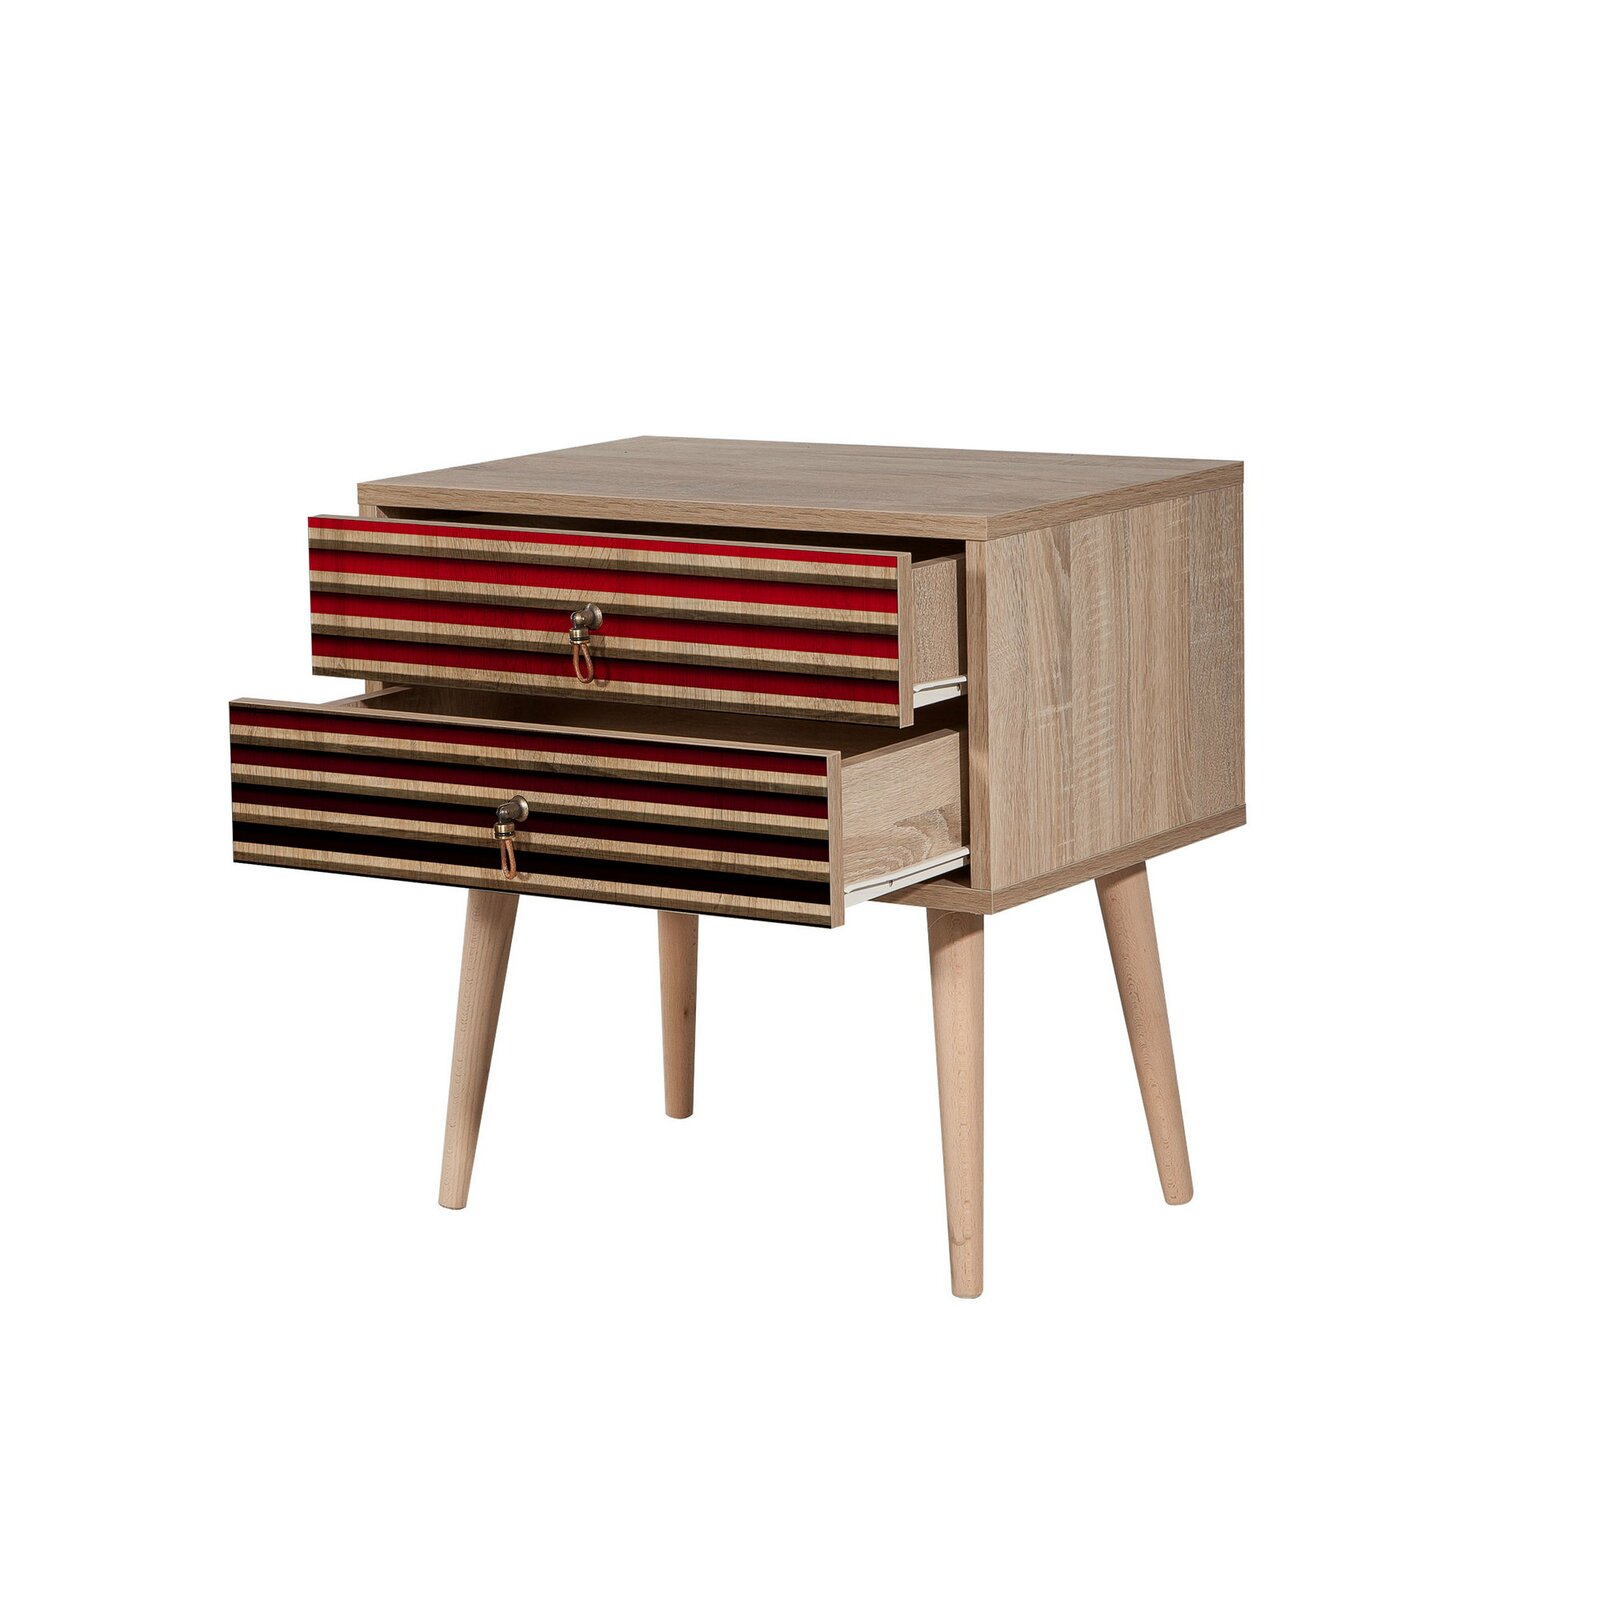 Bless international Manufactured Wood Nightstand